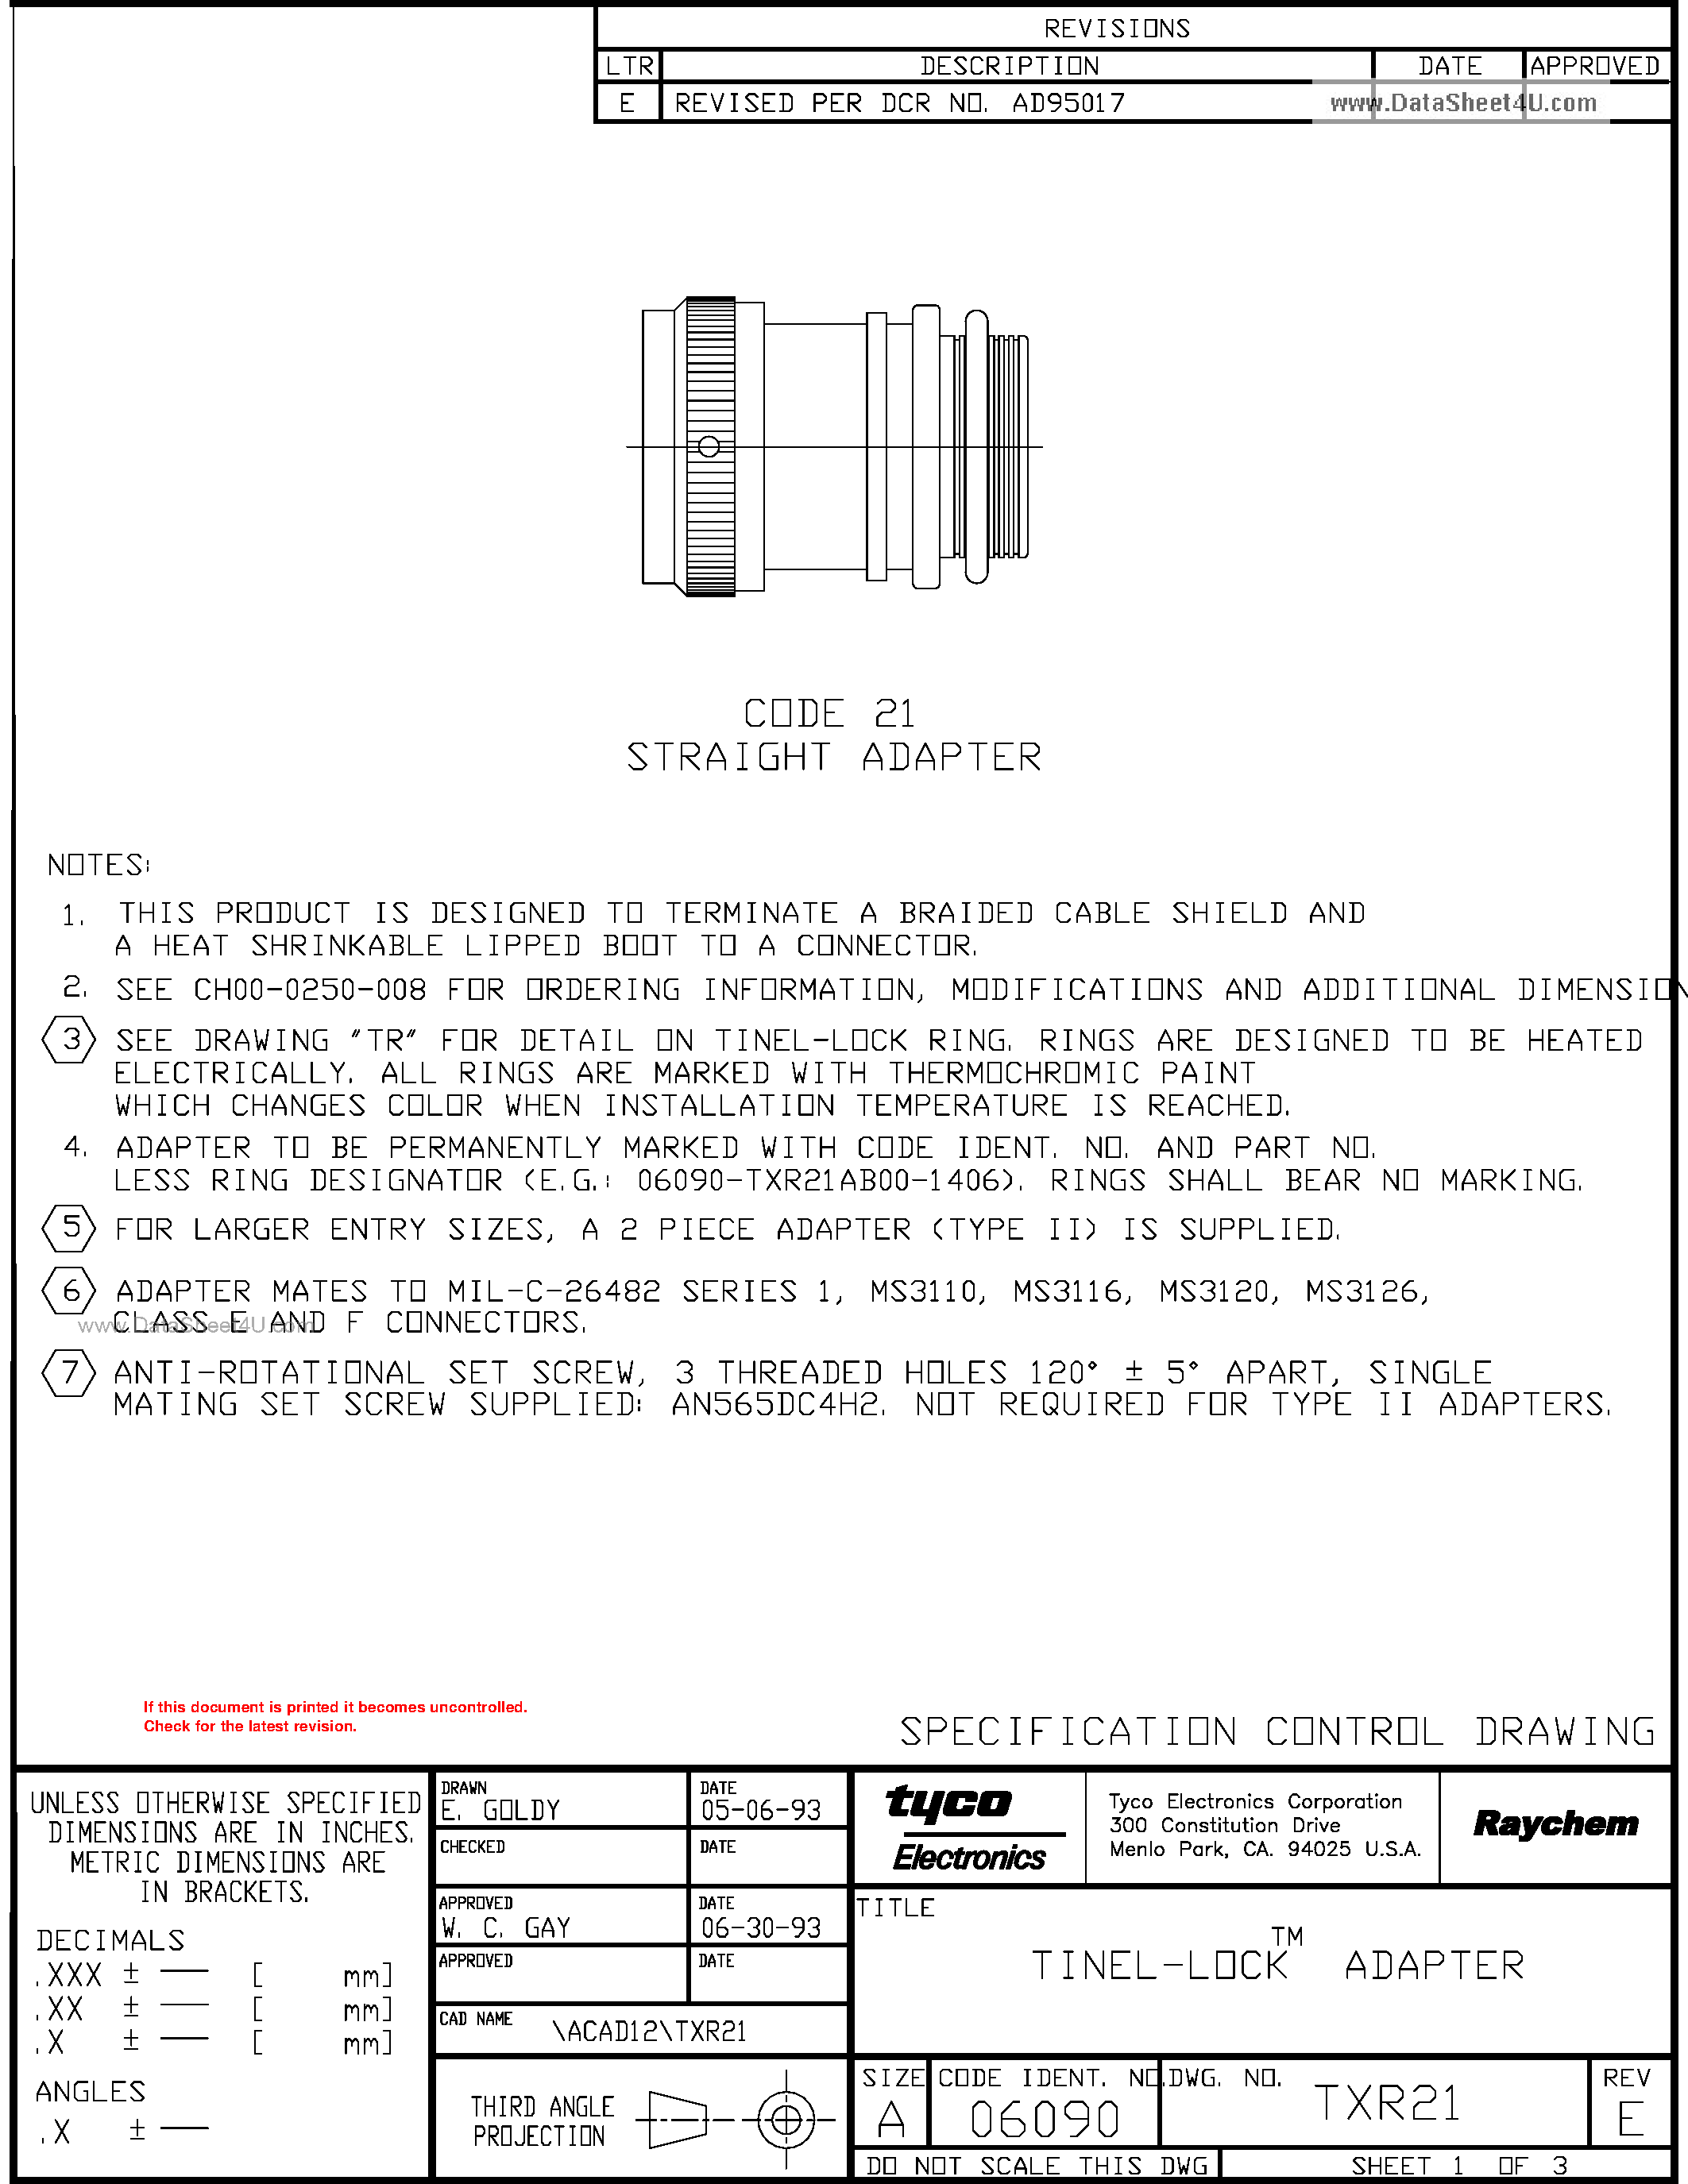 Datasheet TXR21 - Spin and Tinel Lock Adapters page 1